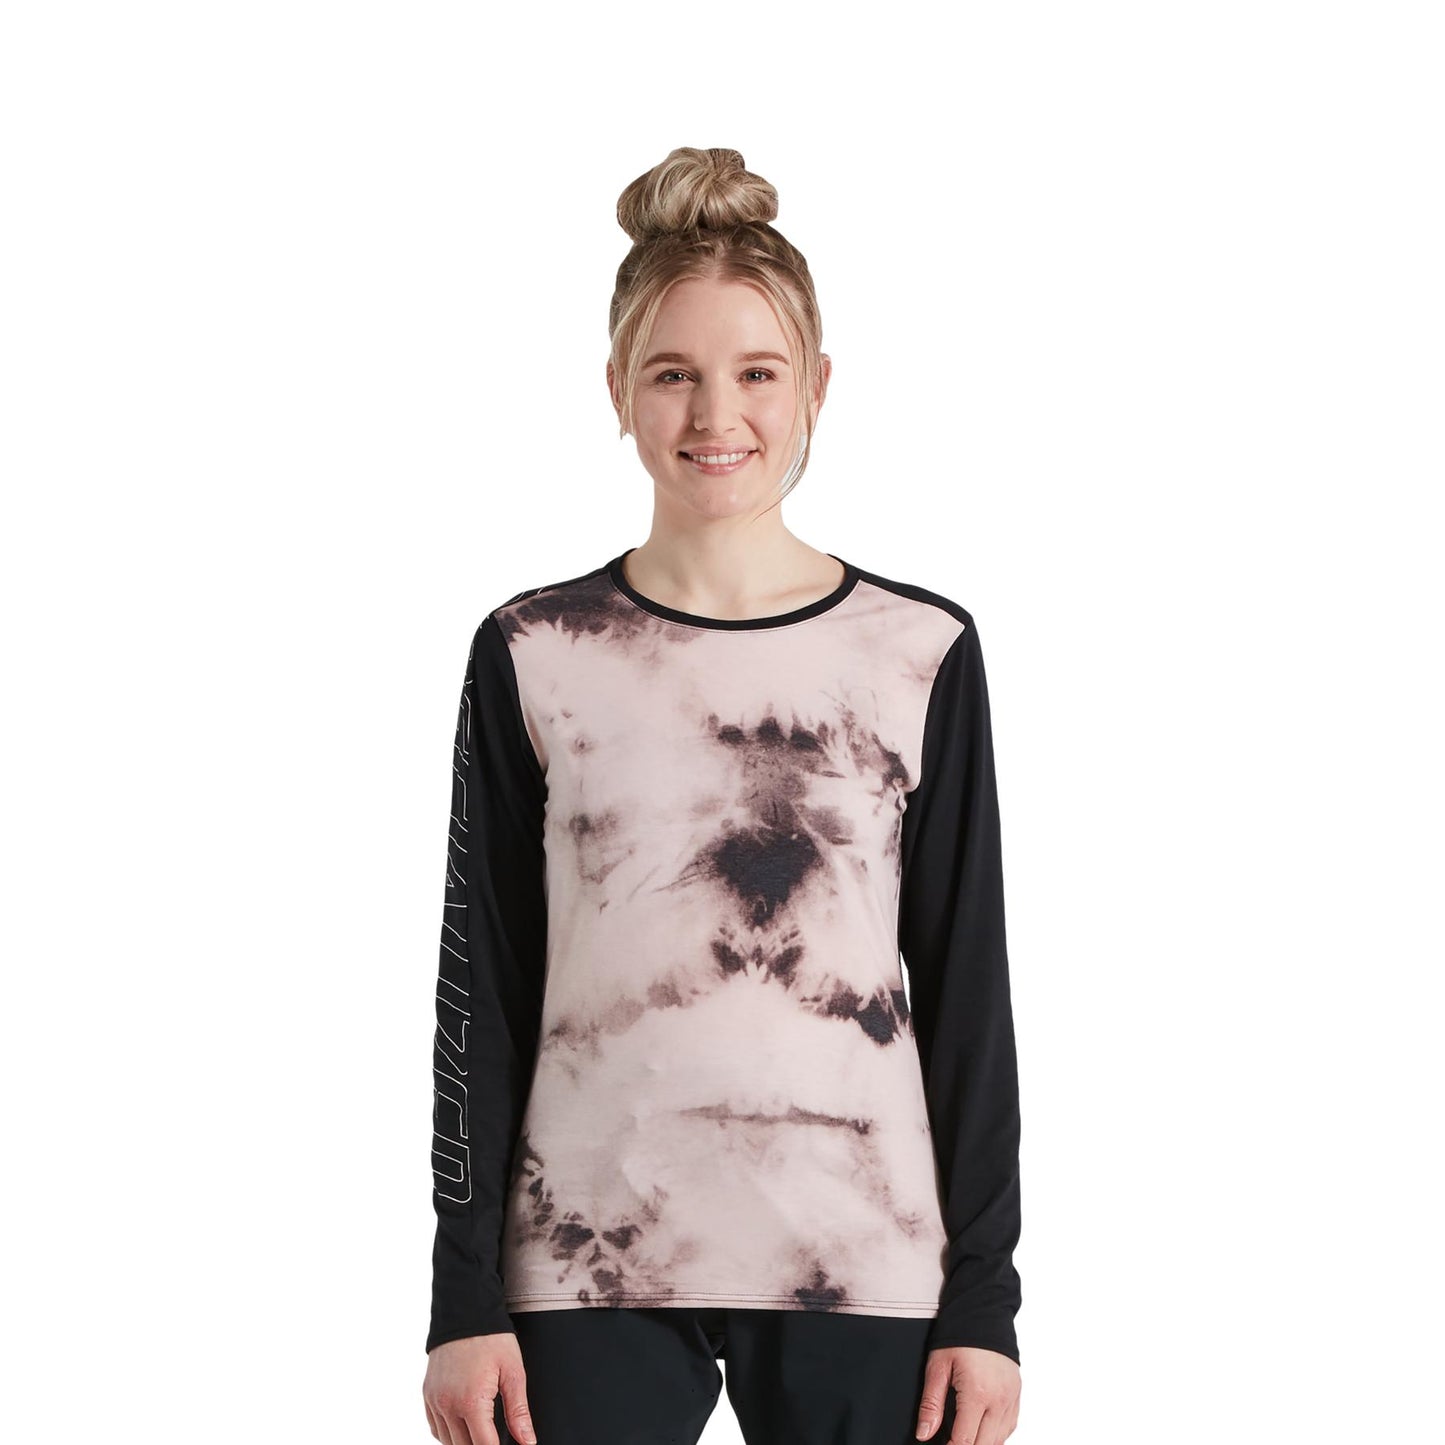 Women's Altered-Edition Trail Long Sleeve Jersey in Blush